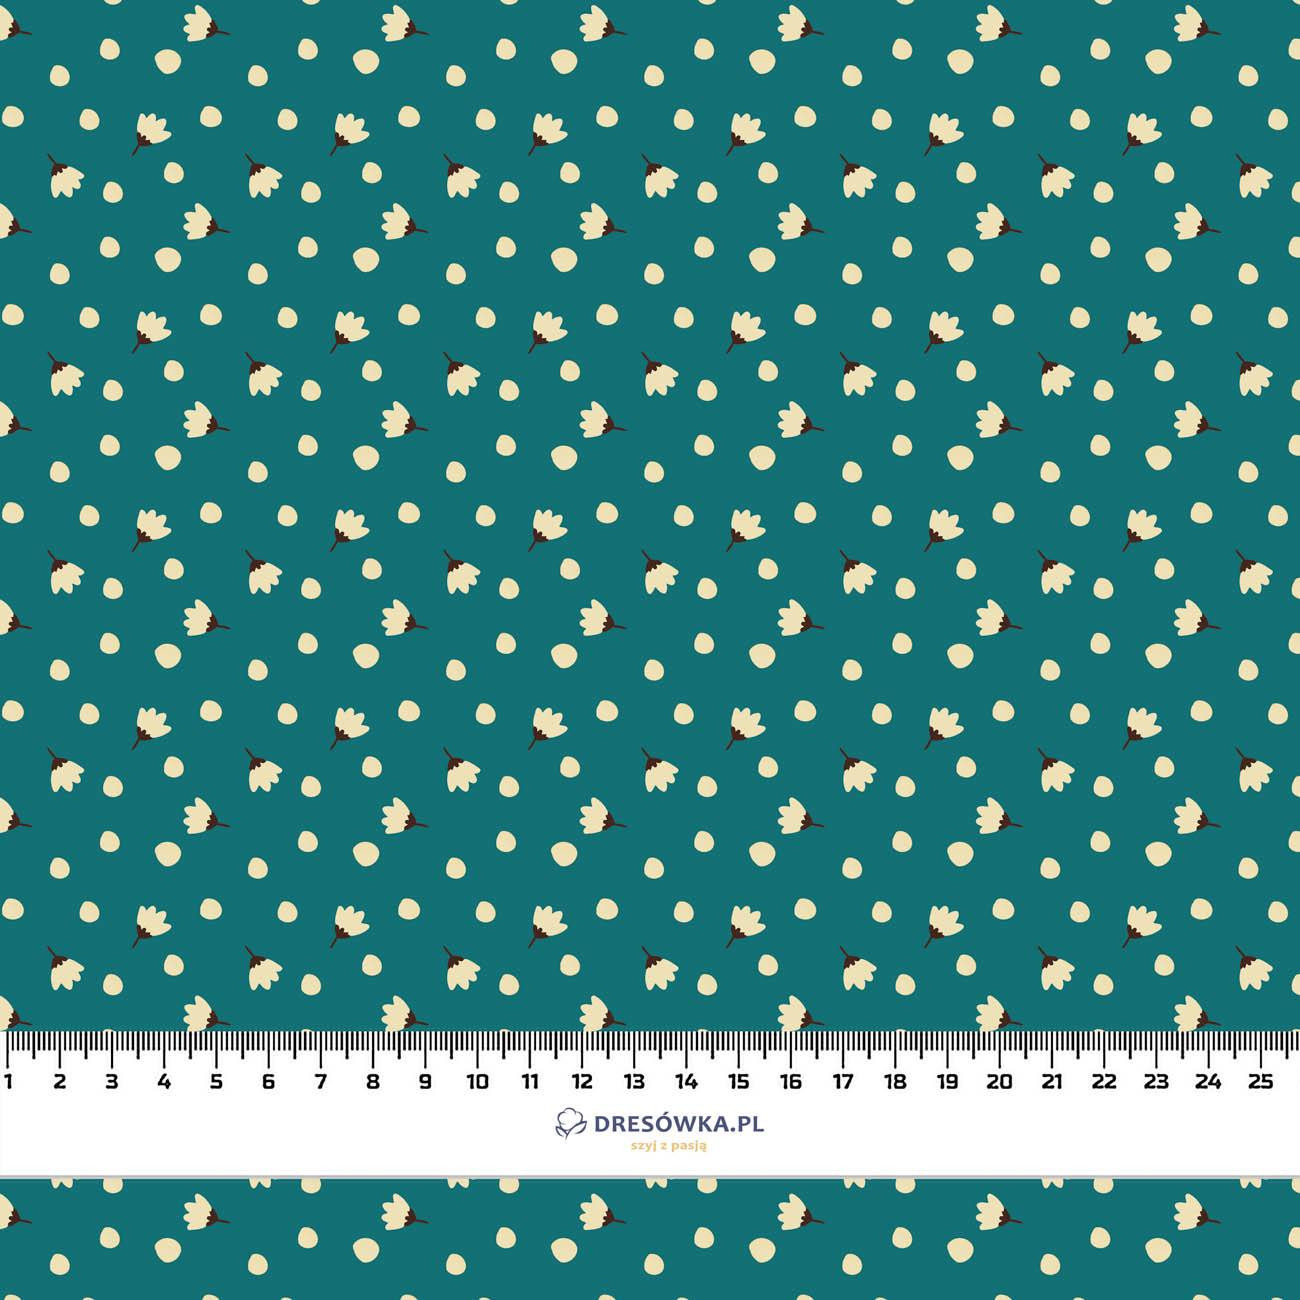 SMALL FLOWERS AND POLKA DOTS - Cotton woven fabric